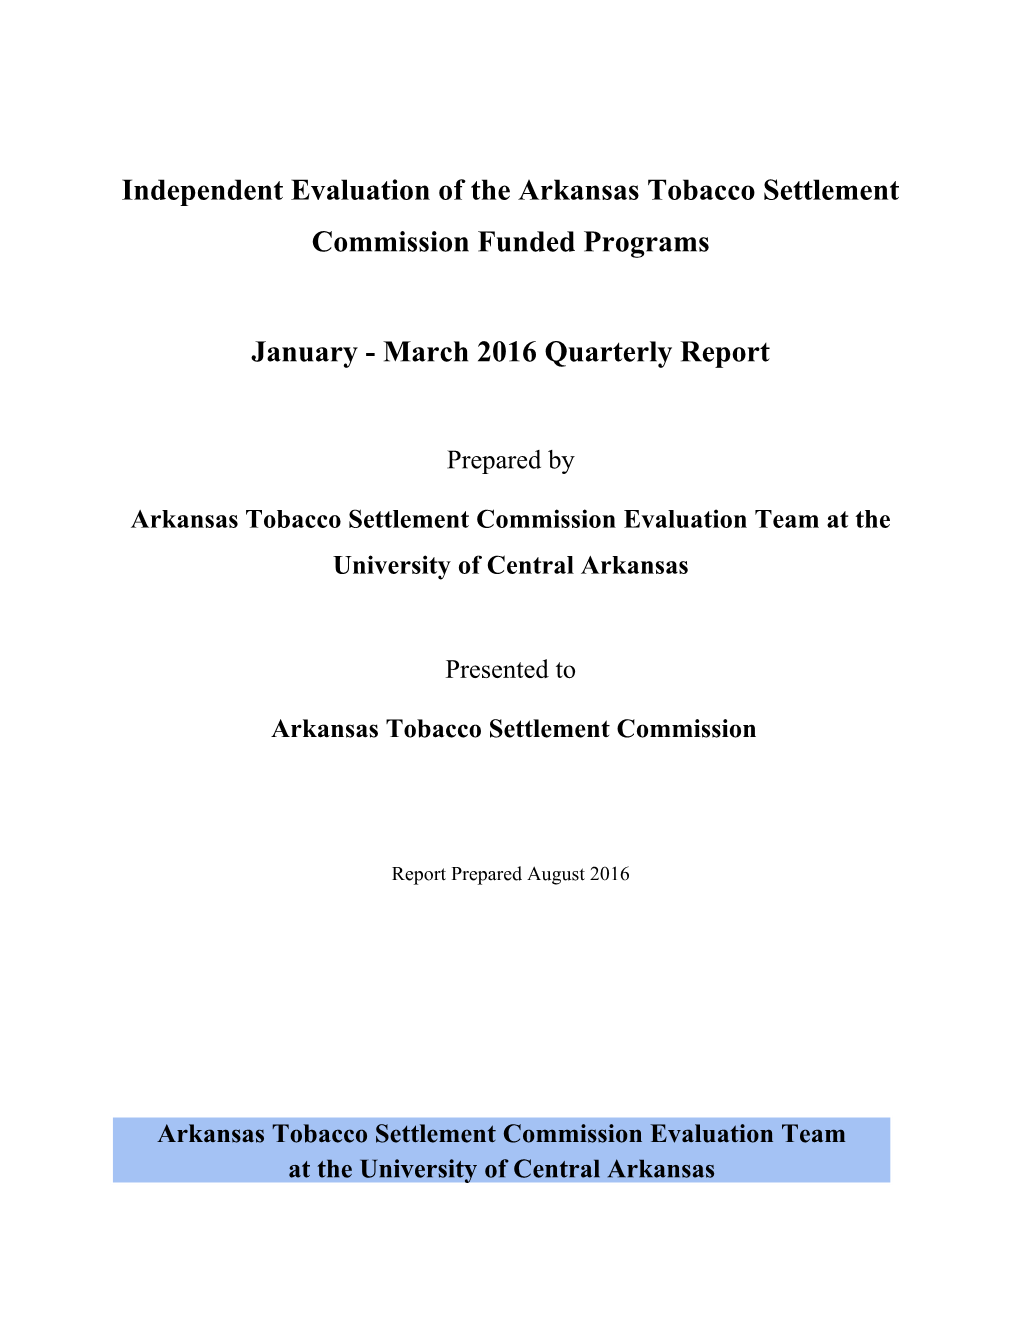 Independent Evaluation of the Arkansas Tobacco Settlement Commission Funded Programs